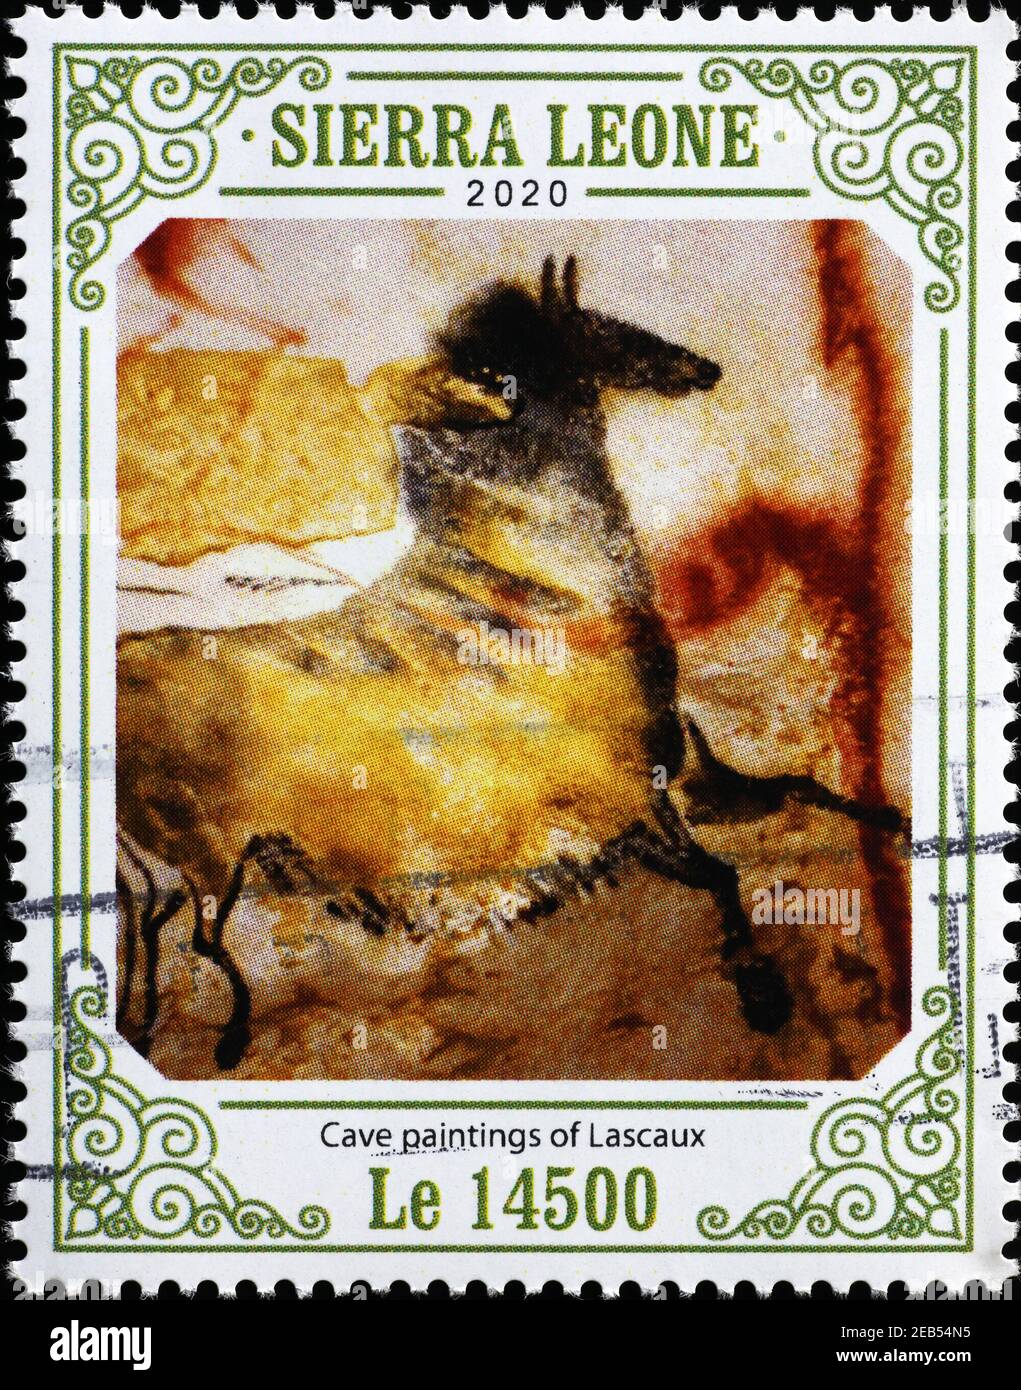 Horse in cave paintings of Lascaux on postage stamp Stock Photo